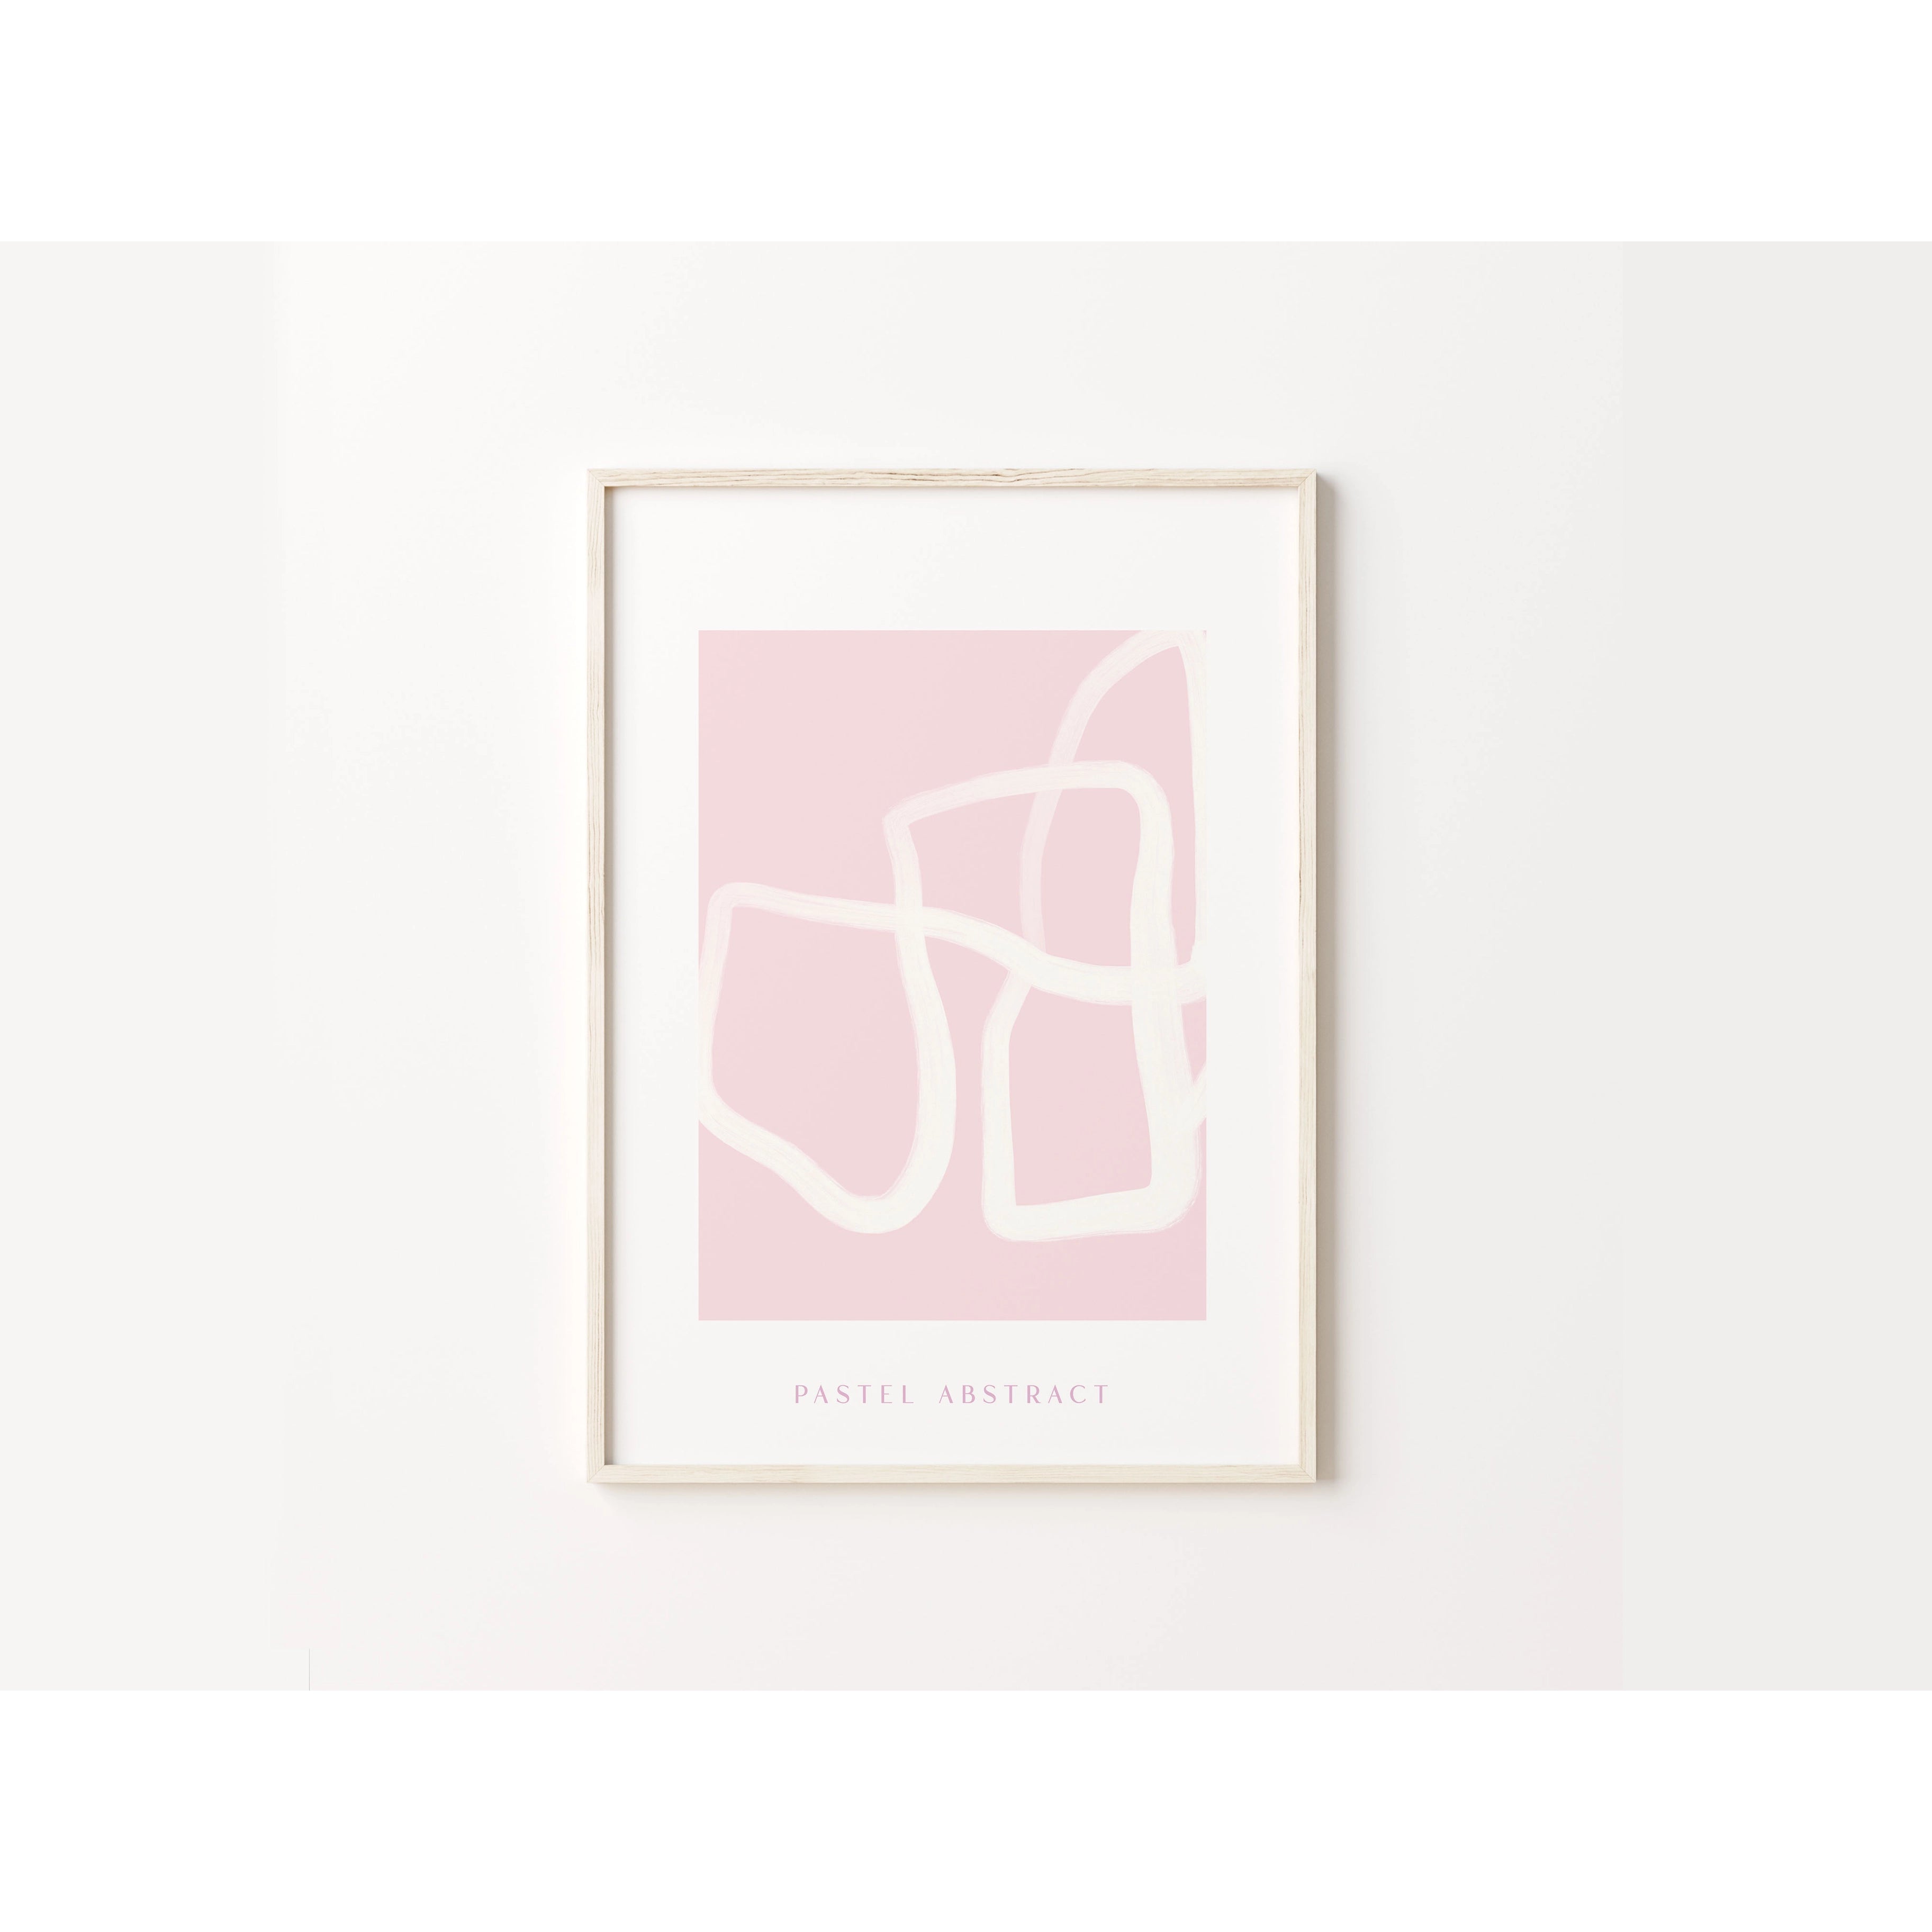 Affiche "Abstract pink"